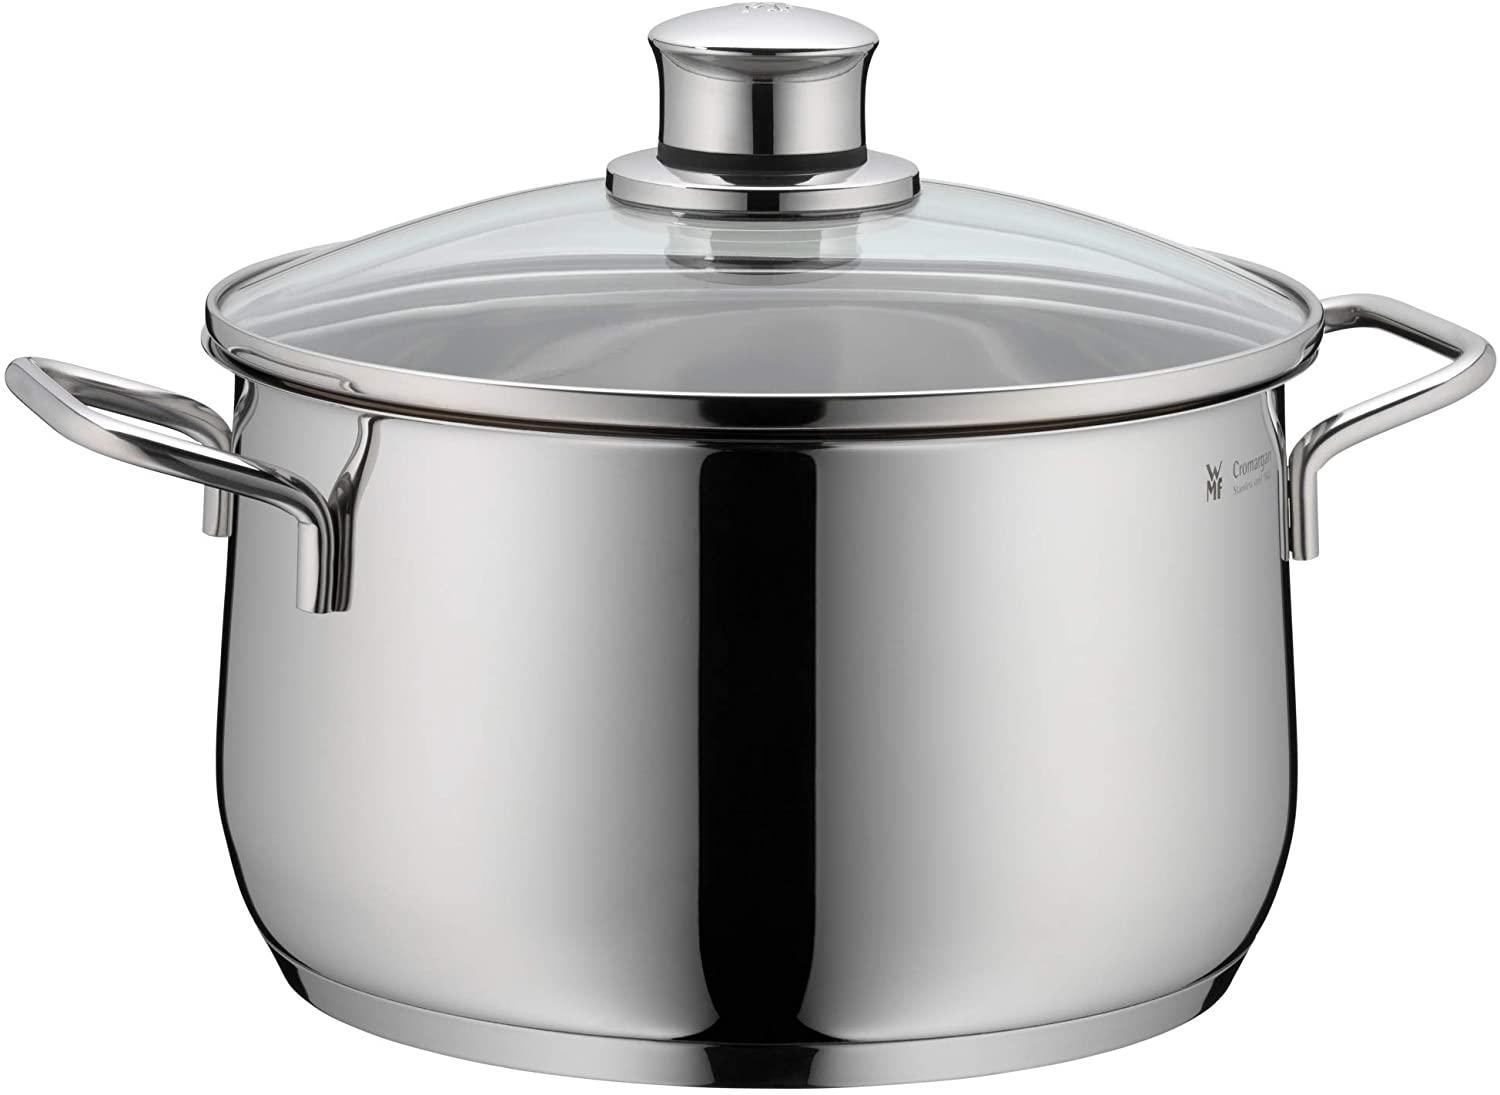 WMF Diadem Plus High Casserole with Lid, 18/10 Stainless Steel, 20 cm